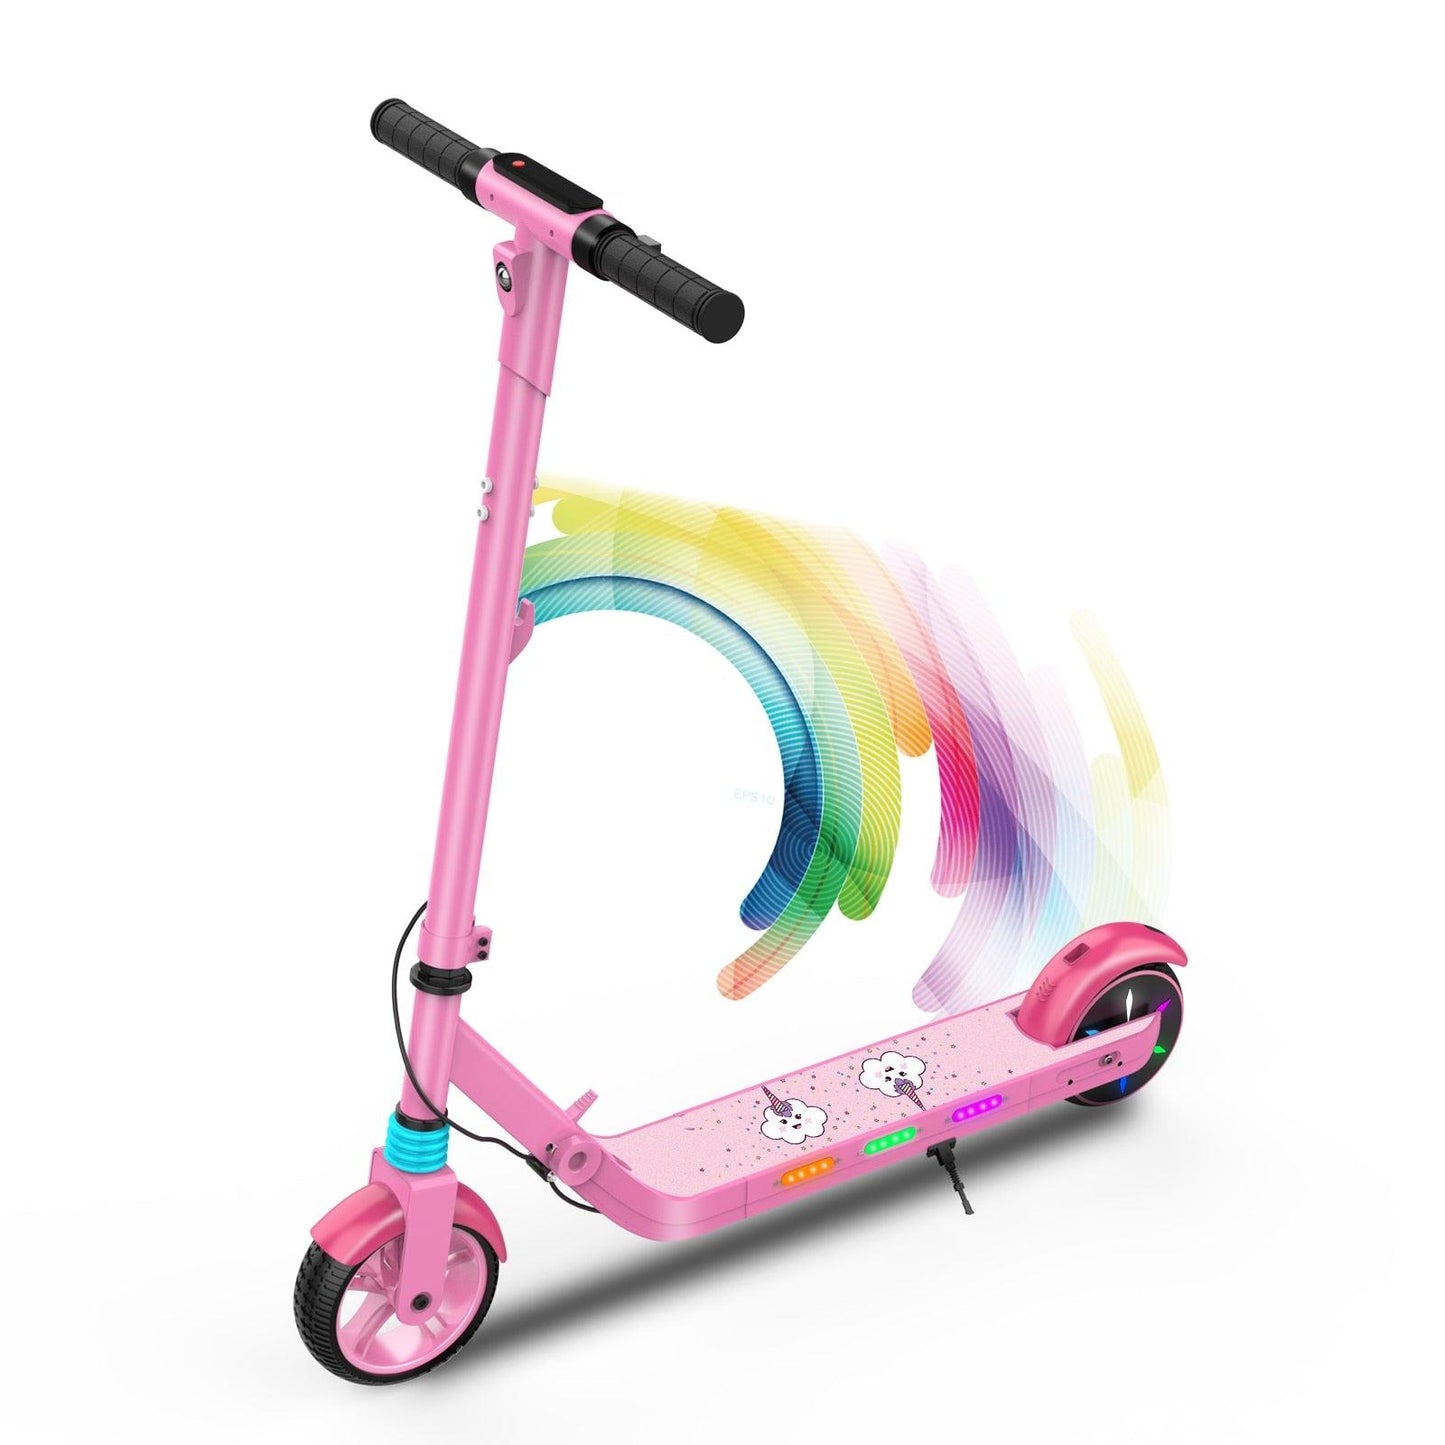 KES1 Electric Scooter for Kids/Folding Kids E-Scooter wt Bluetooth Audio - The GoatFind